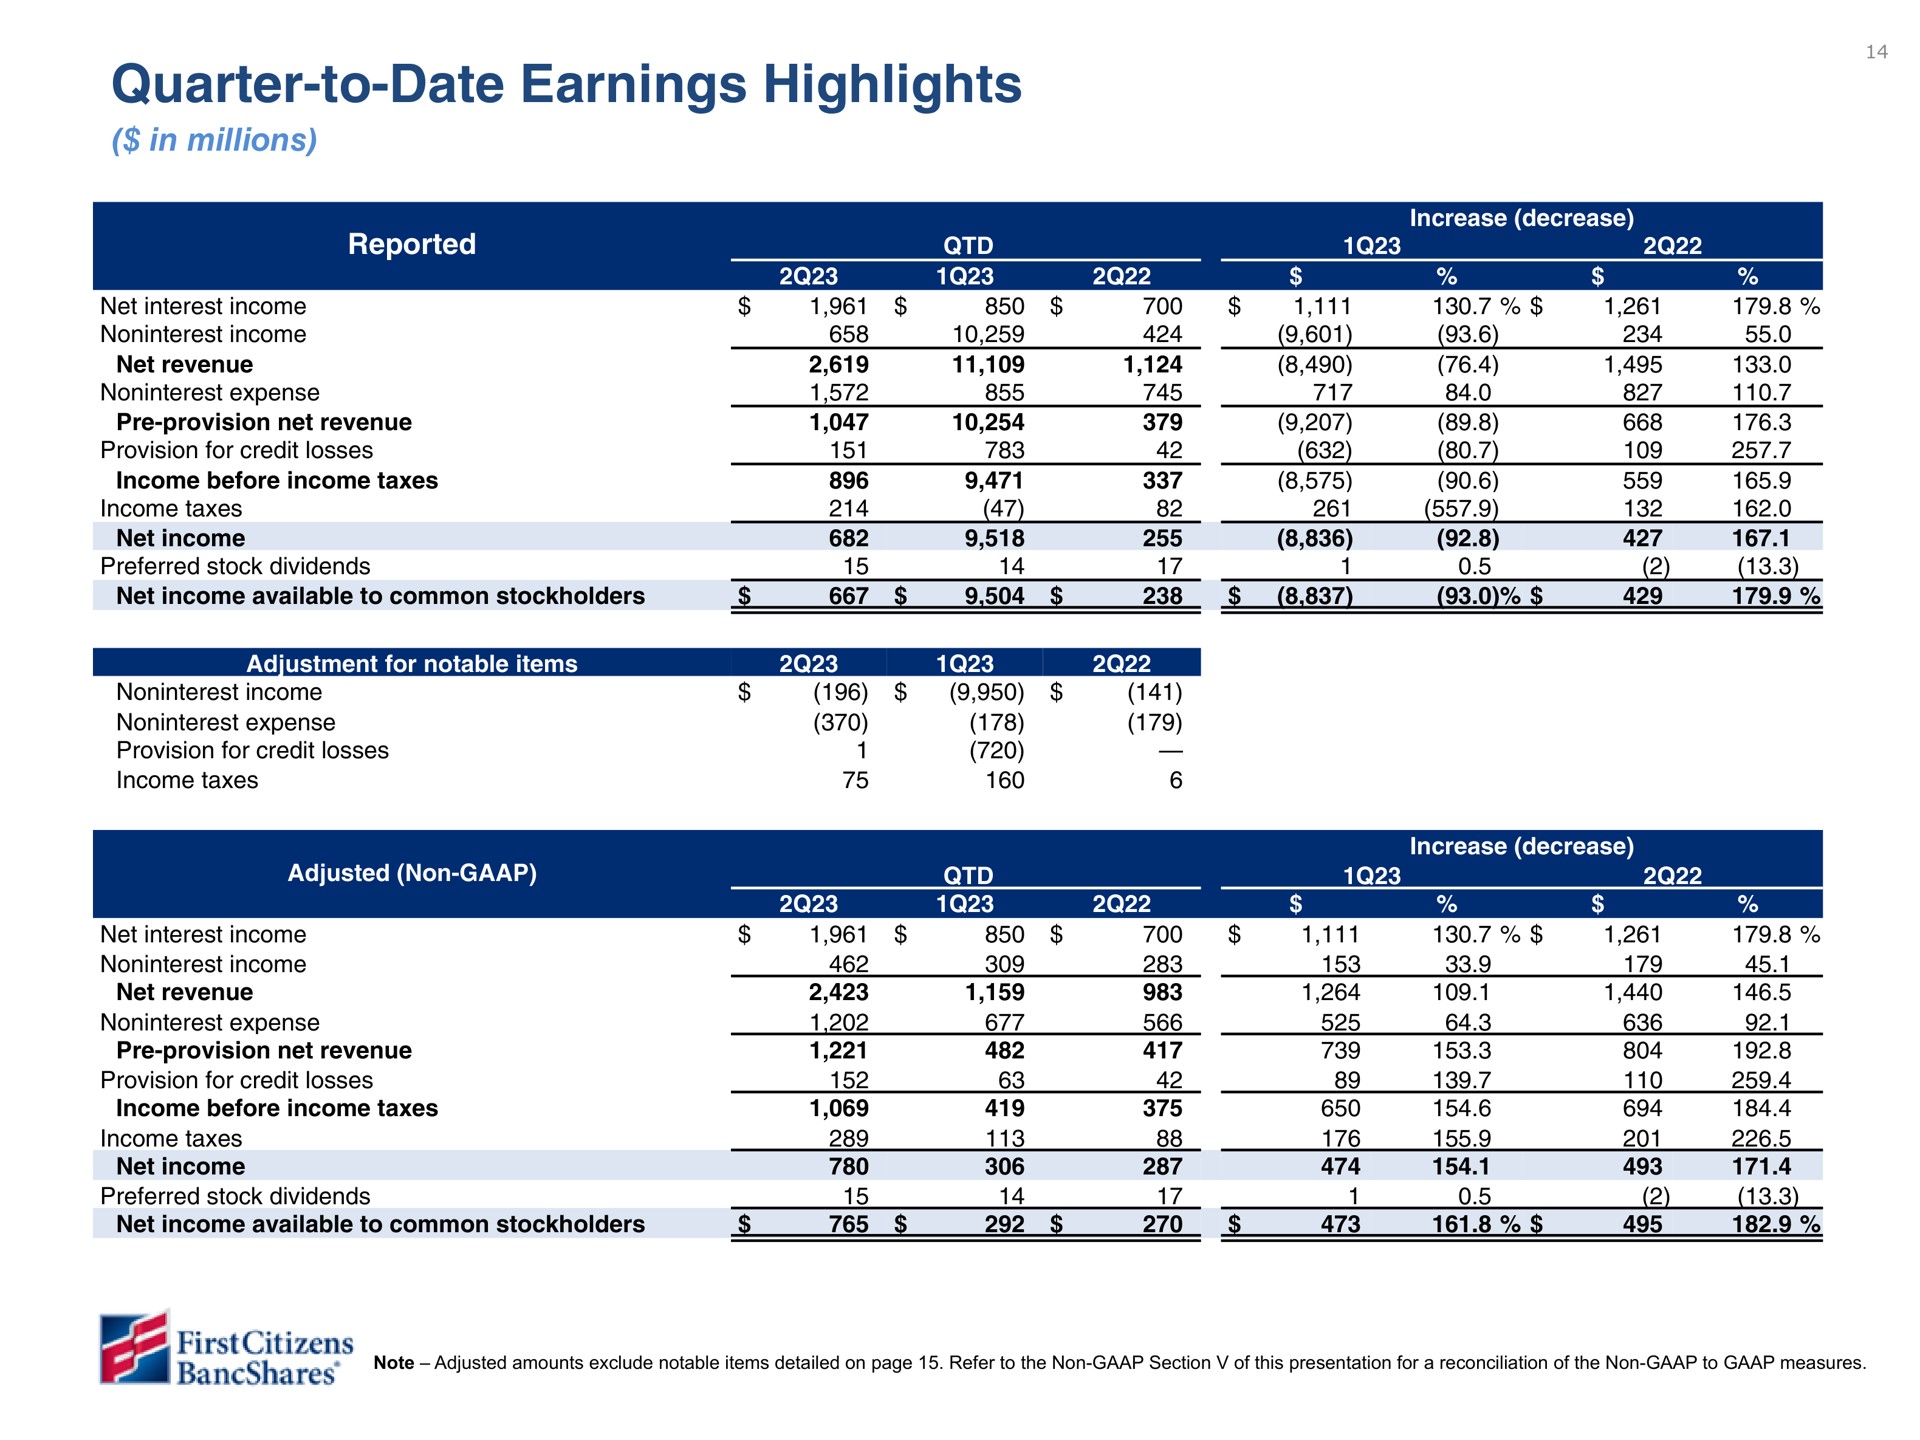 quarter to date earnings highlights | First Citizens BancShares